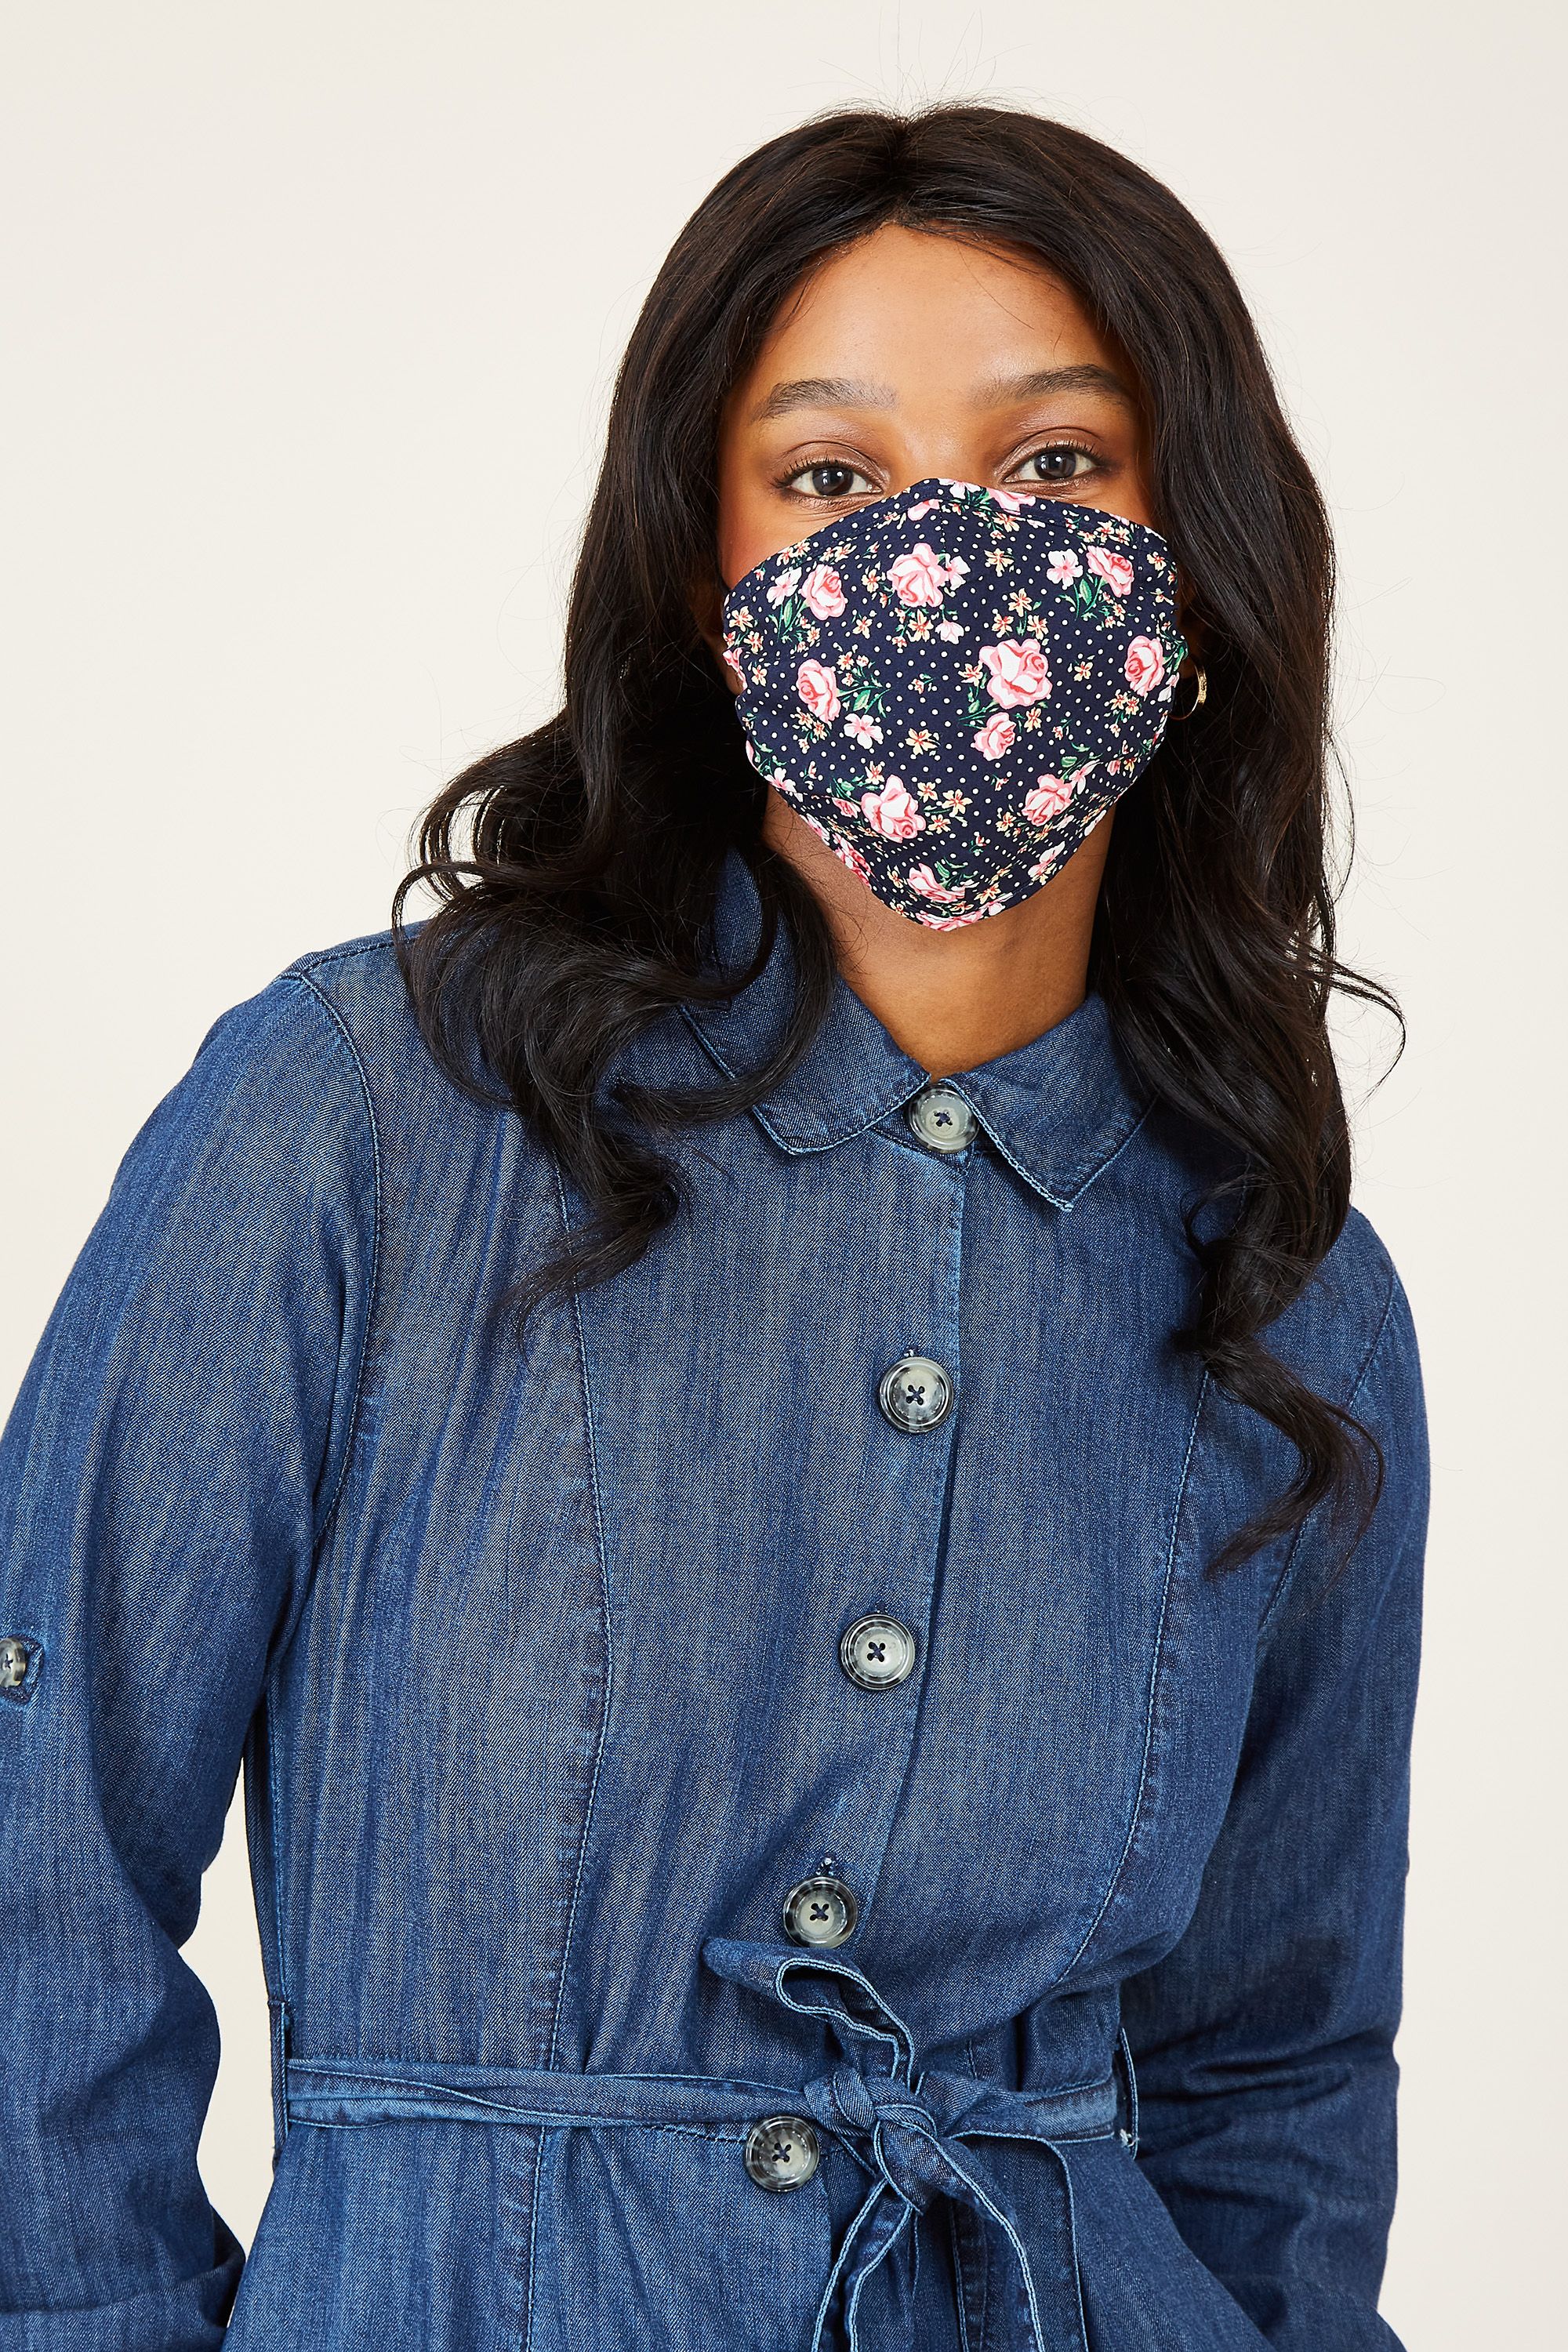 Designed with a pretty double print, this comfortable Rose Spot Face Covering is cut from soft cotton. It's made from the end of our fabric rolls, so it's sustainable and kind to the planet.Please remember it is a non-medical mask and not PPE. Wash your hands before and after putting on the covering. One Poundfrom each covering is donated to Sufra, a charity that supports and provides food for people in extreme poverty.  100% Cotton, Lining:100% Cotton